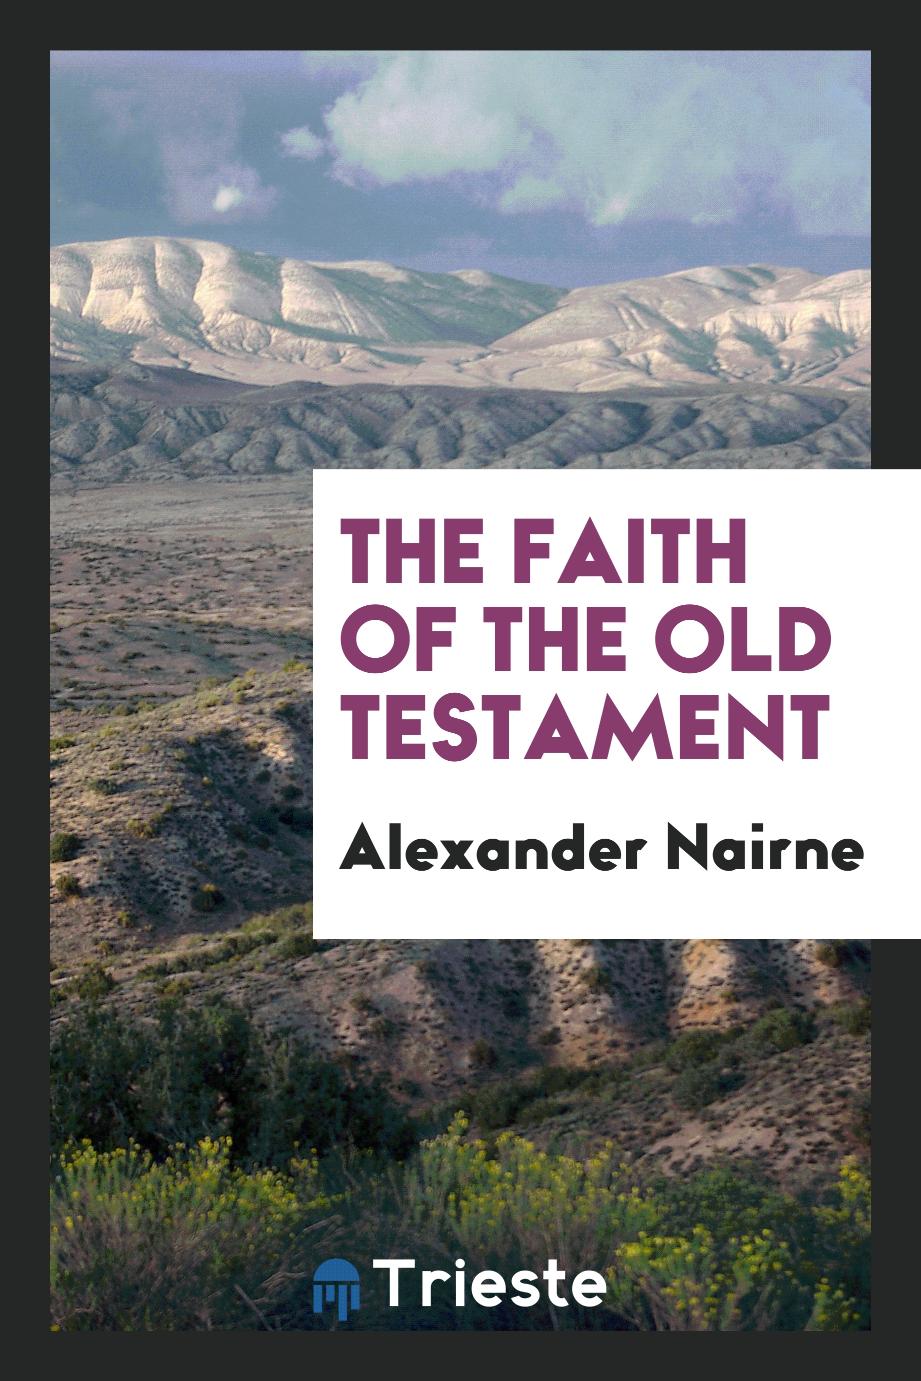 The faith of the Old Testament